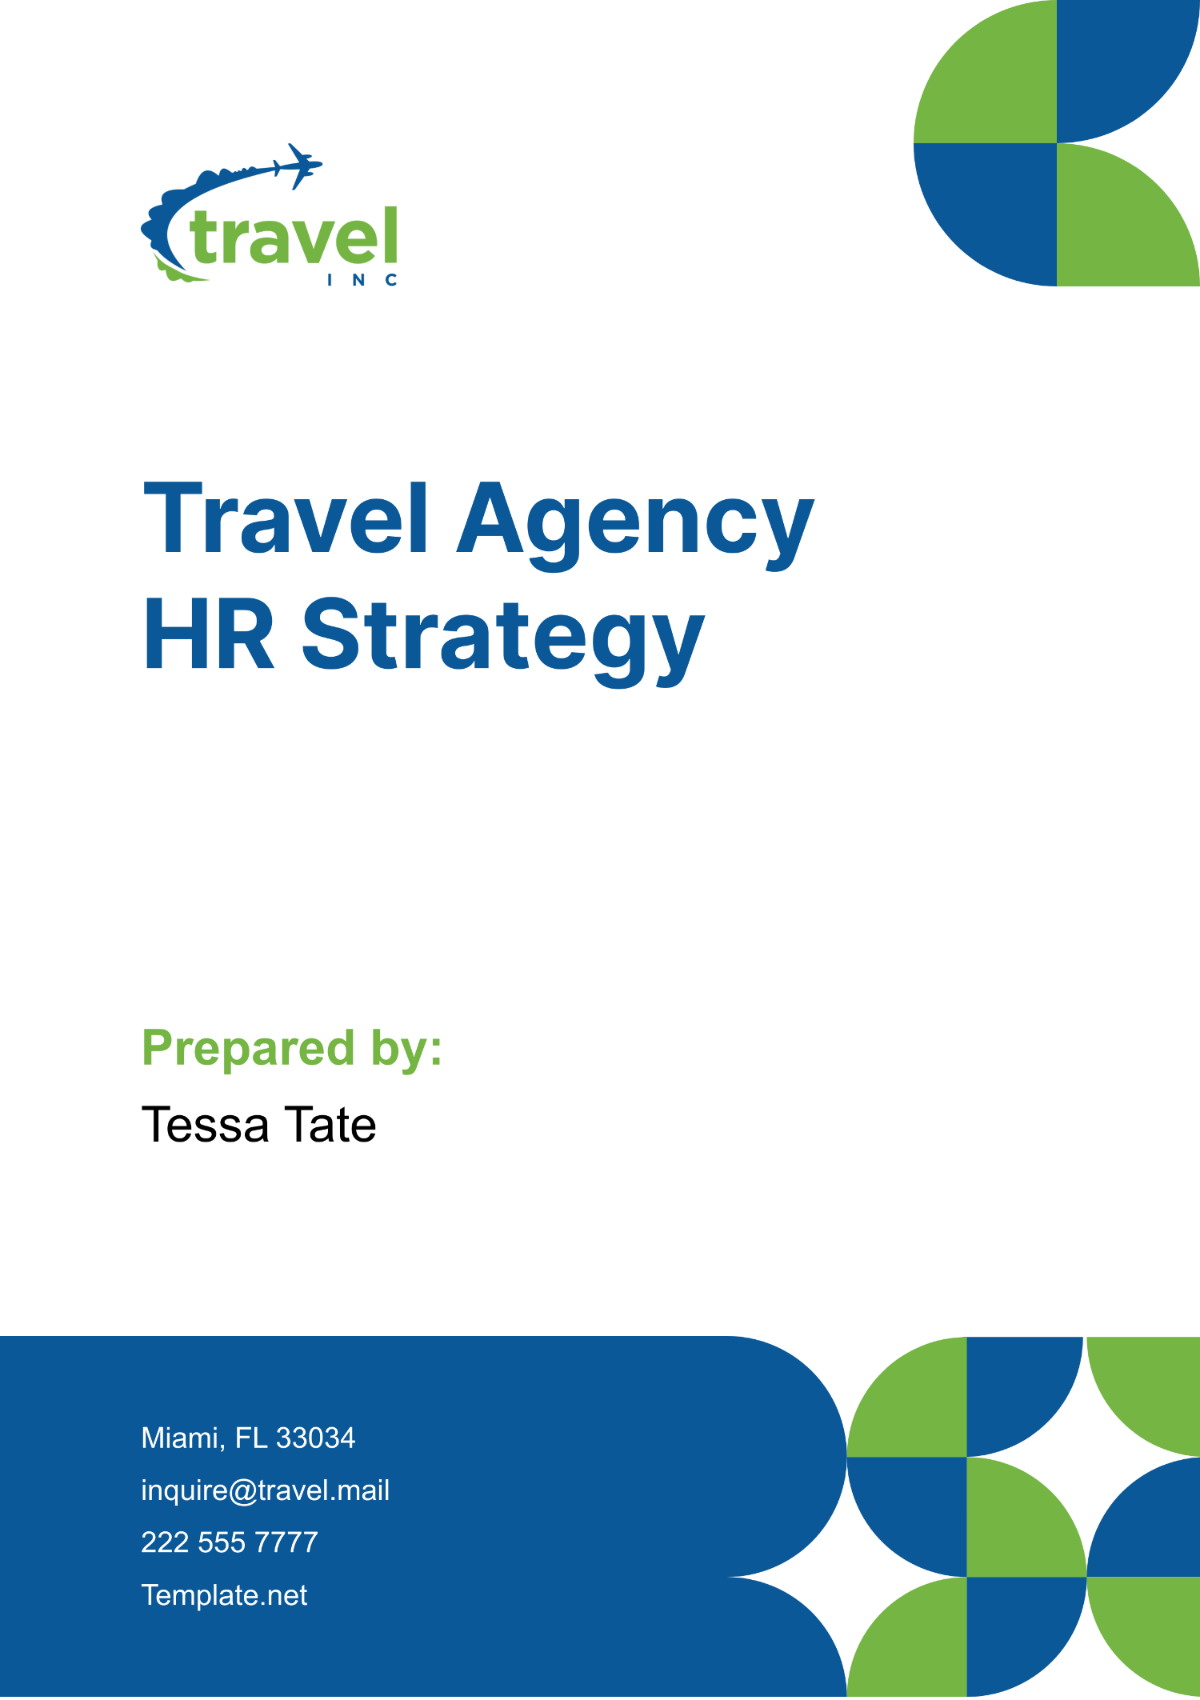 Travel Agency HR Strategy Template